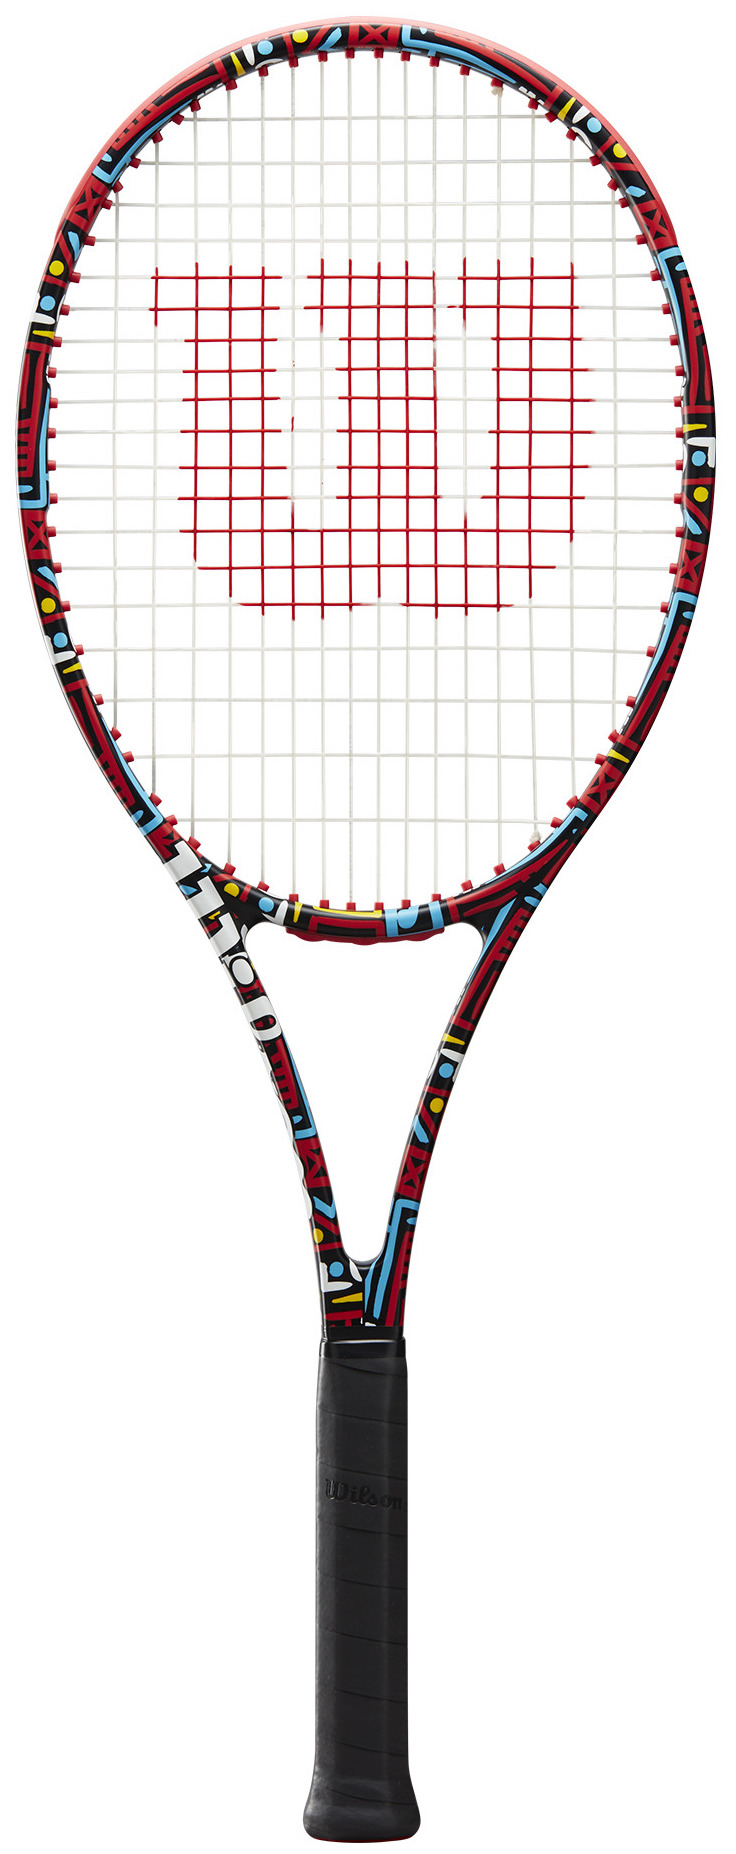 Wholesale cheap tennis string reels & Accessories for Tennis Players 